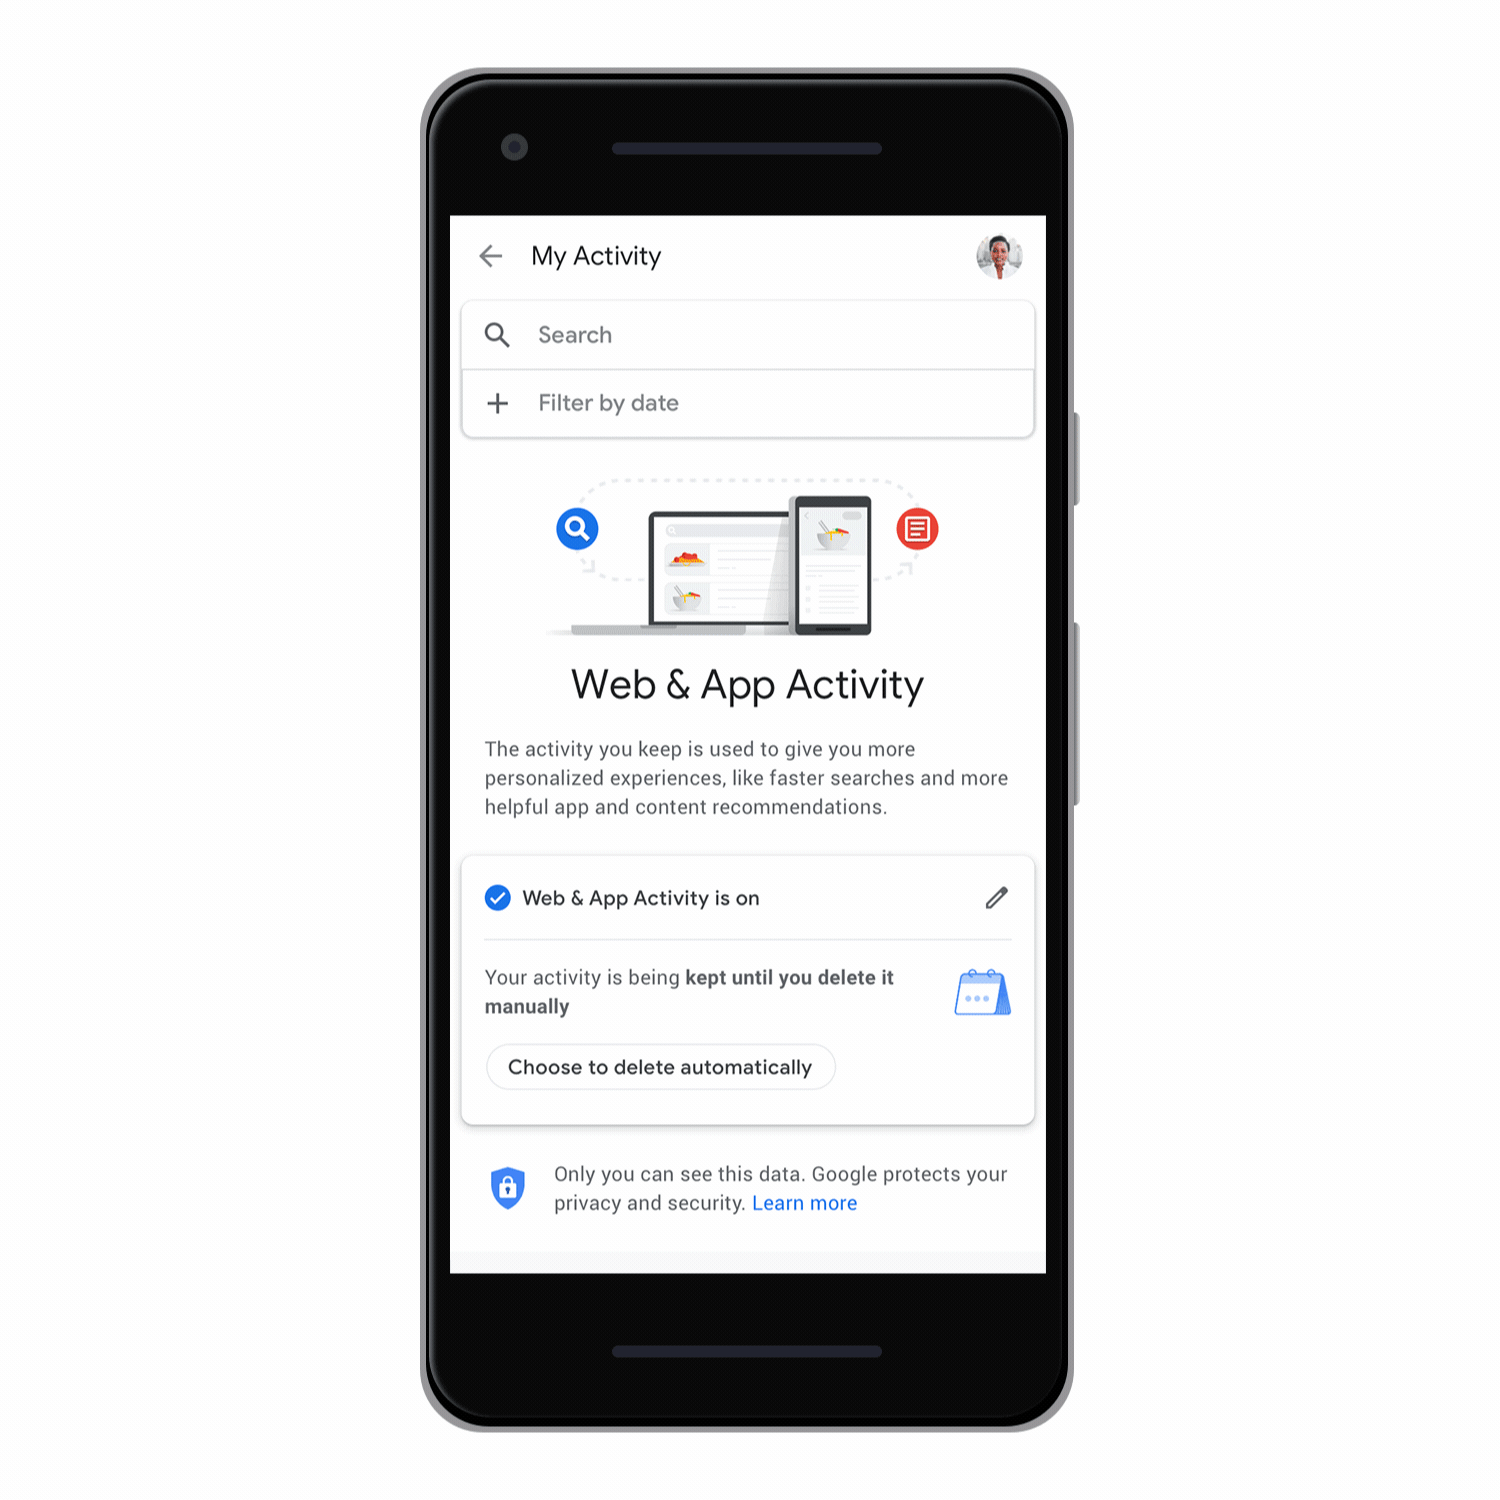 Google: Introducing auto-delete controls for your Location History and activity data